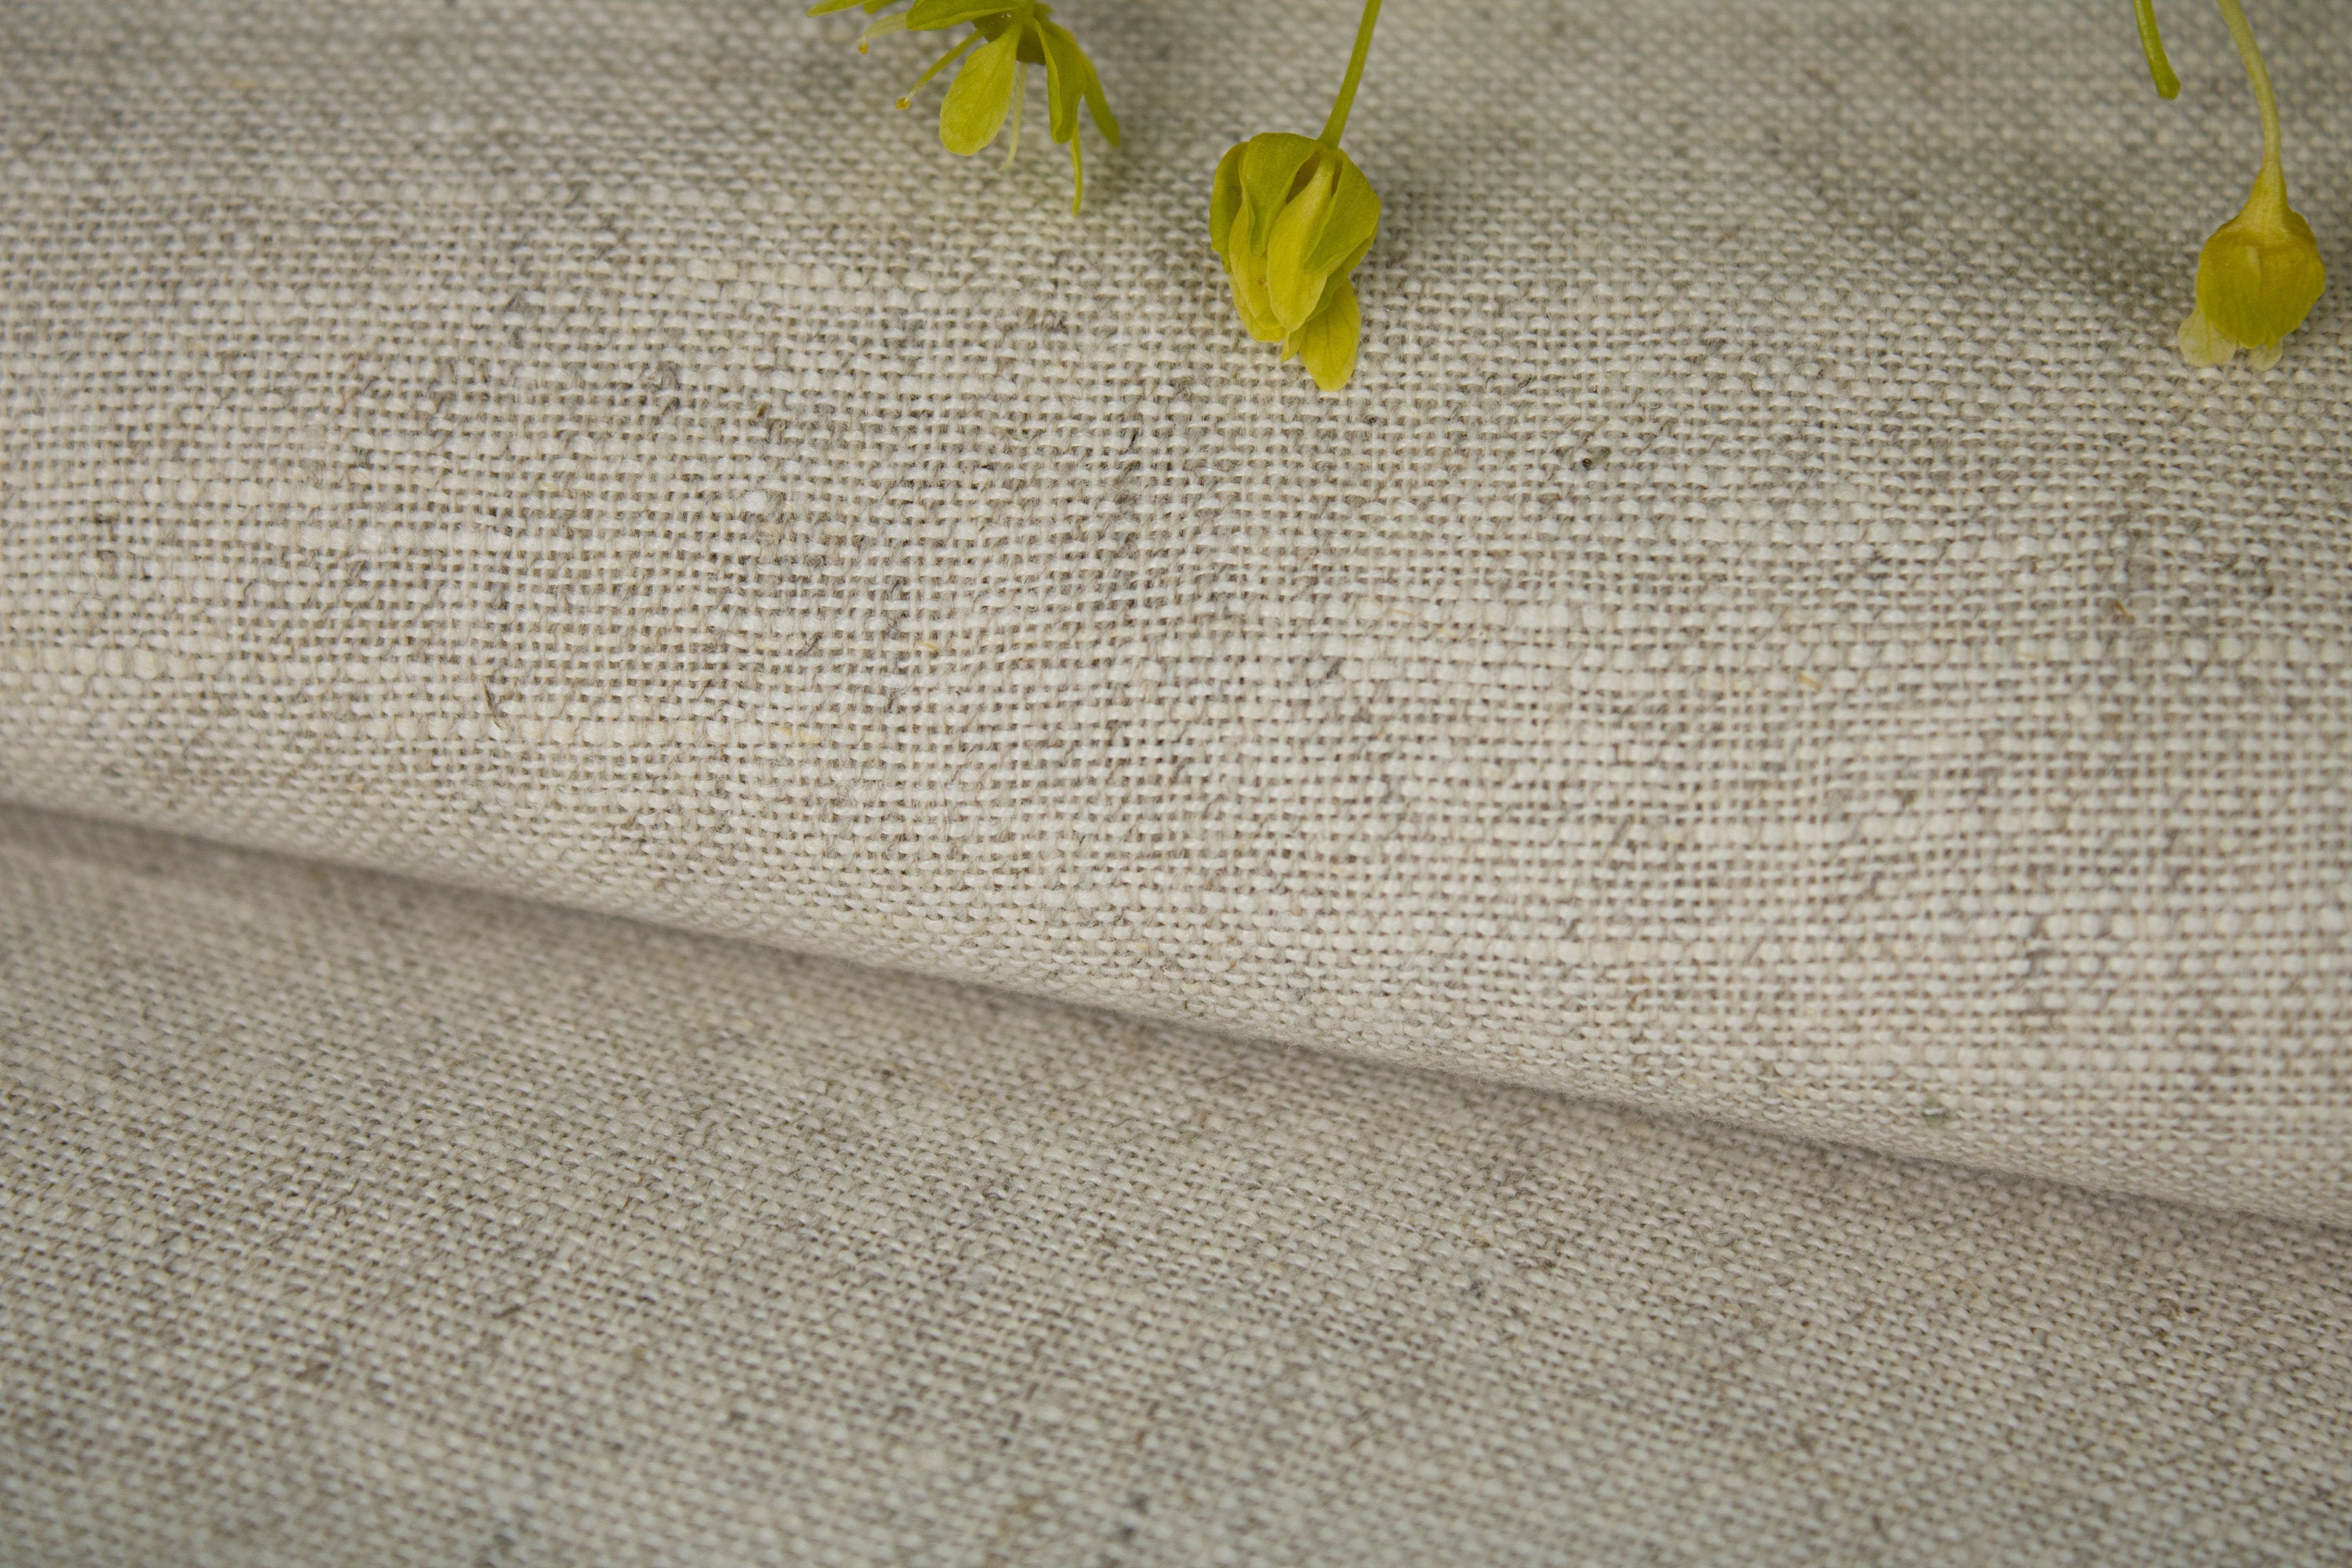 EXTRA WIDE Linen Fabric by the yard for curtains / Bedding fabric / Buy Linen Online